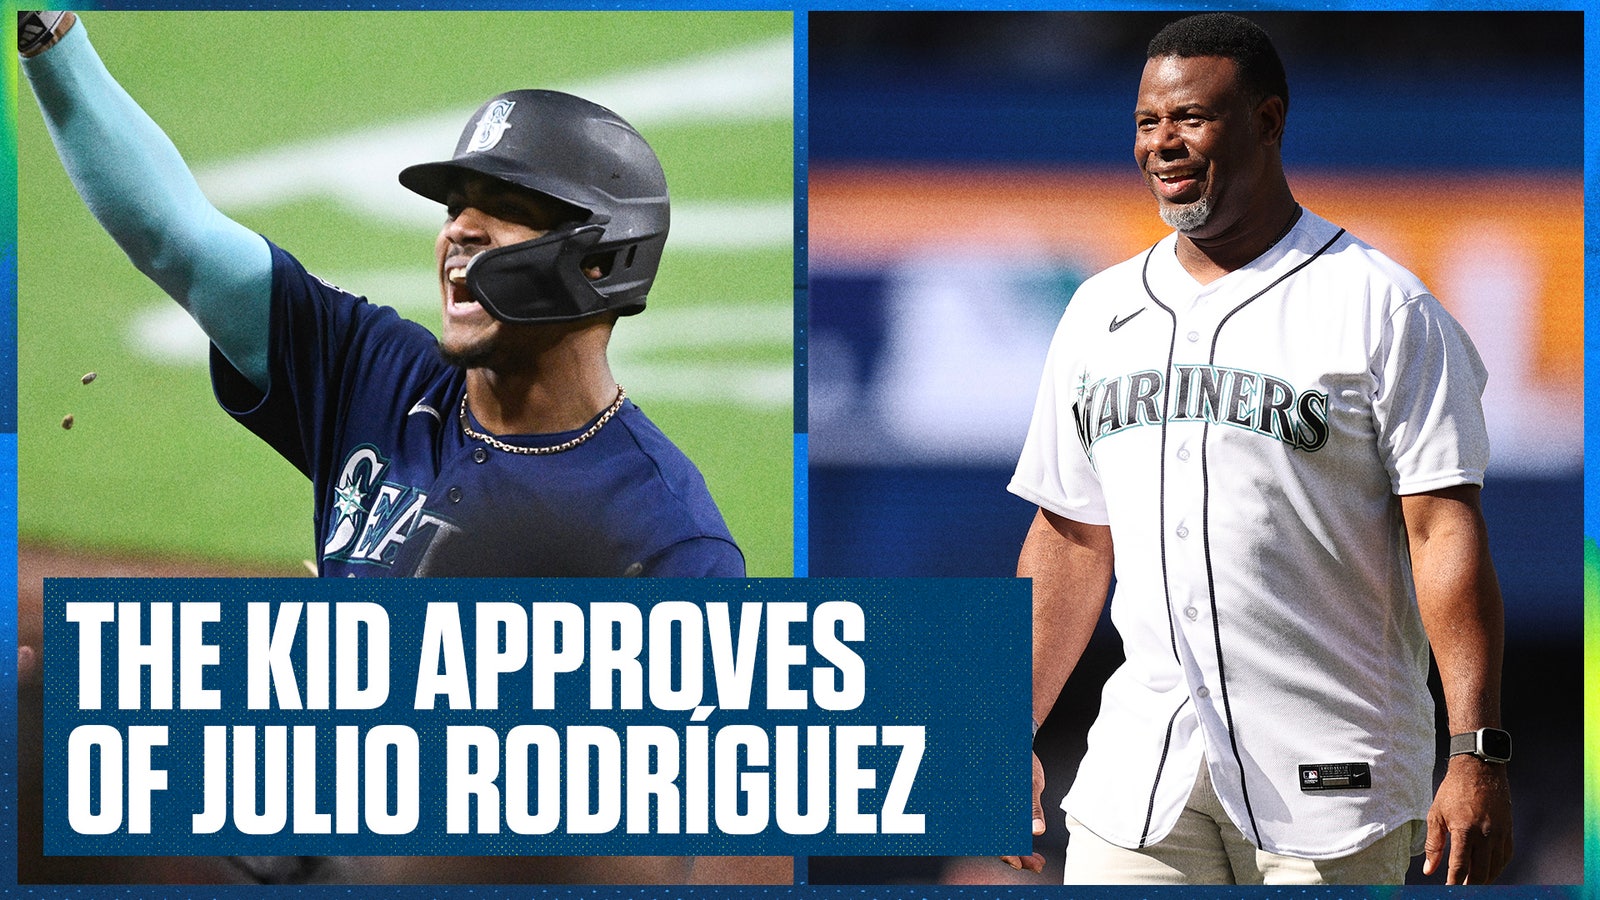 Julio Rodriguez: Top prospect, 21, thrilled to make Mariners roster